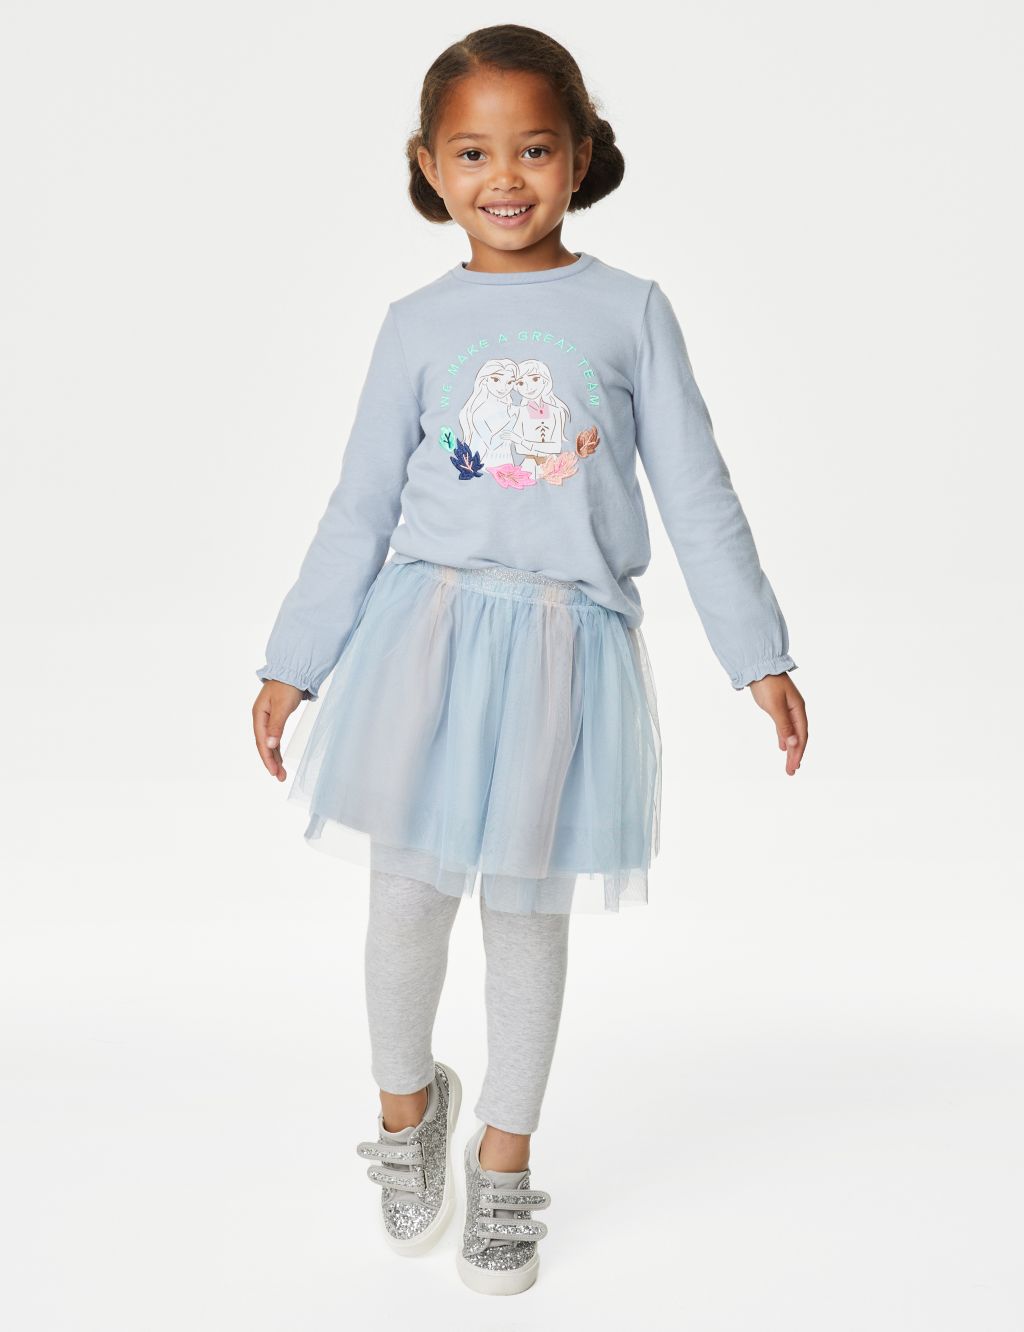 2pc Disney Frozen™ Top & Bottom Outfit (2-8 Yrs) image 1